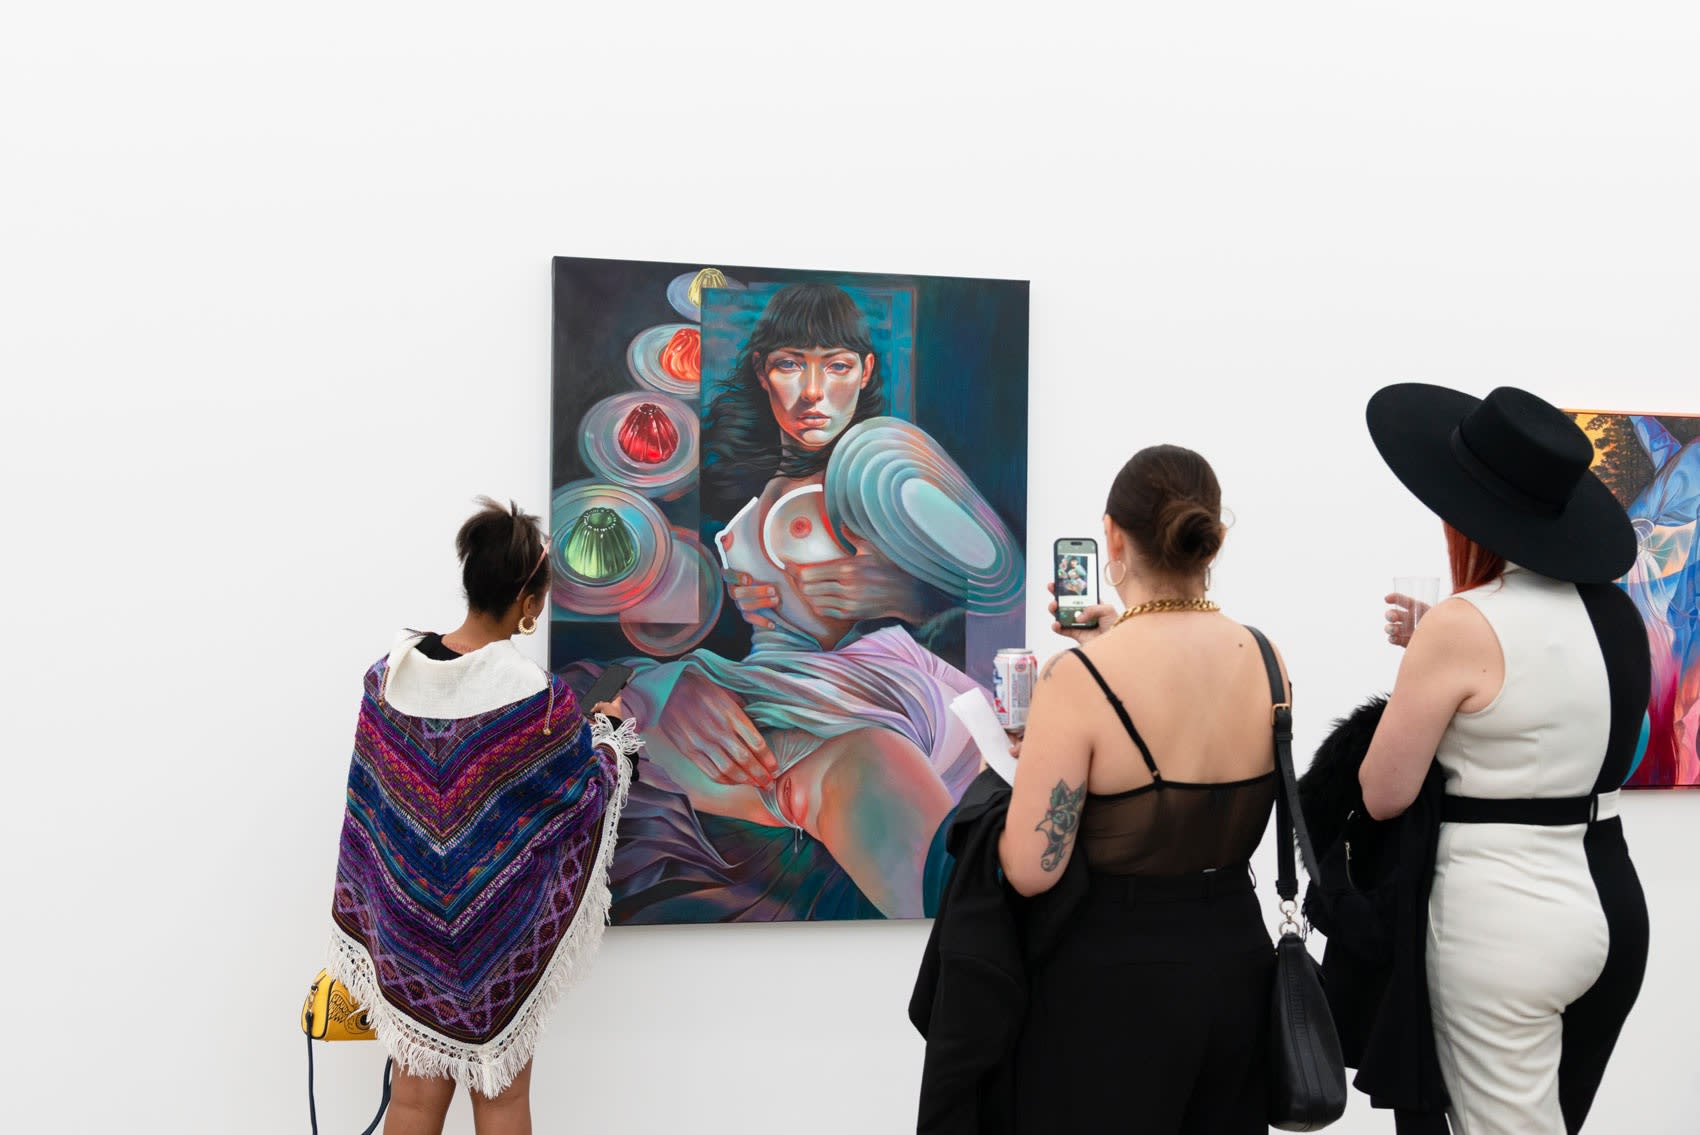 Women stand in front of and take pictures of a colorful painting of a woman, facing the viewers while turning, the hands of a man coming in from out of the frame to caress her.